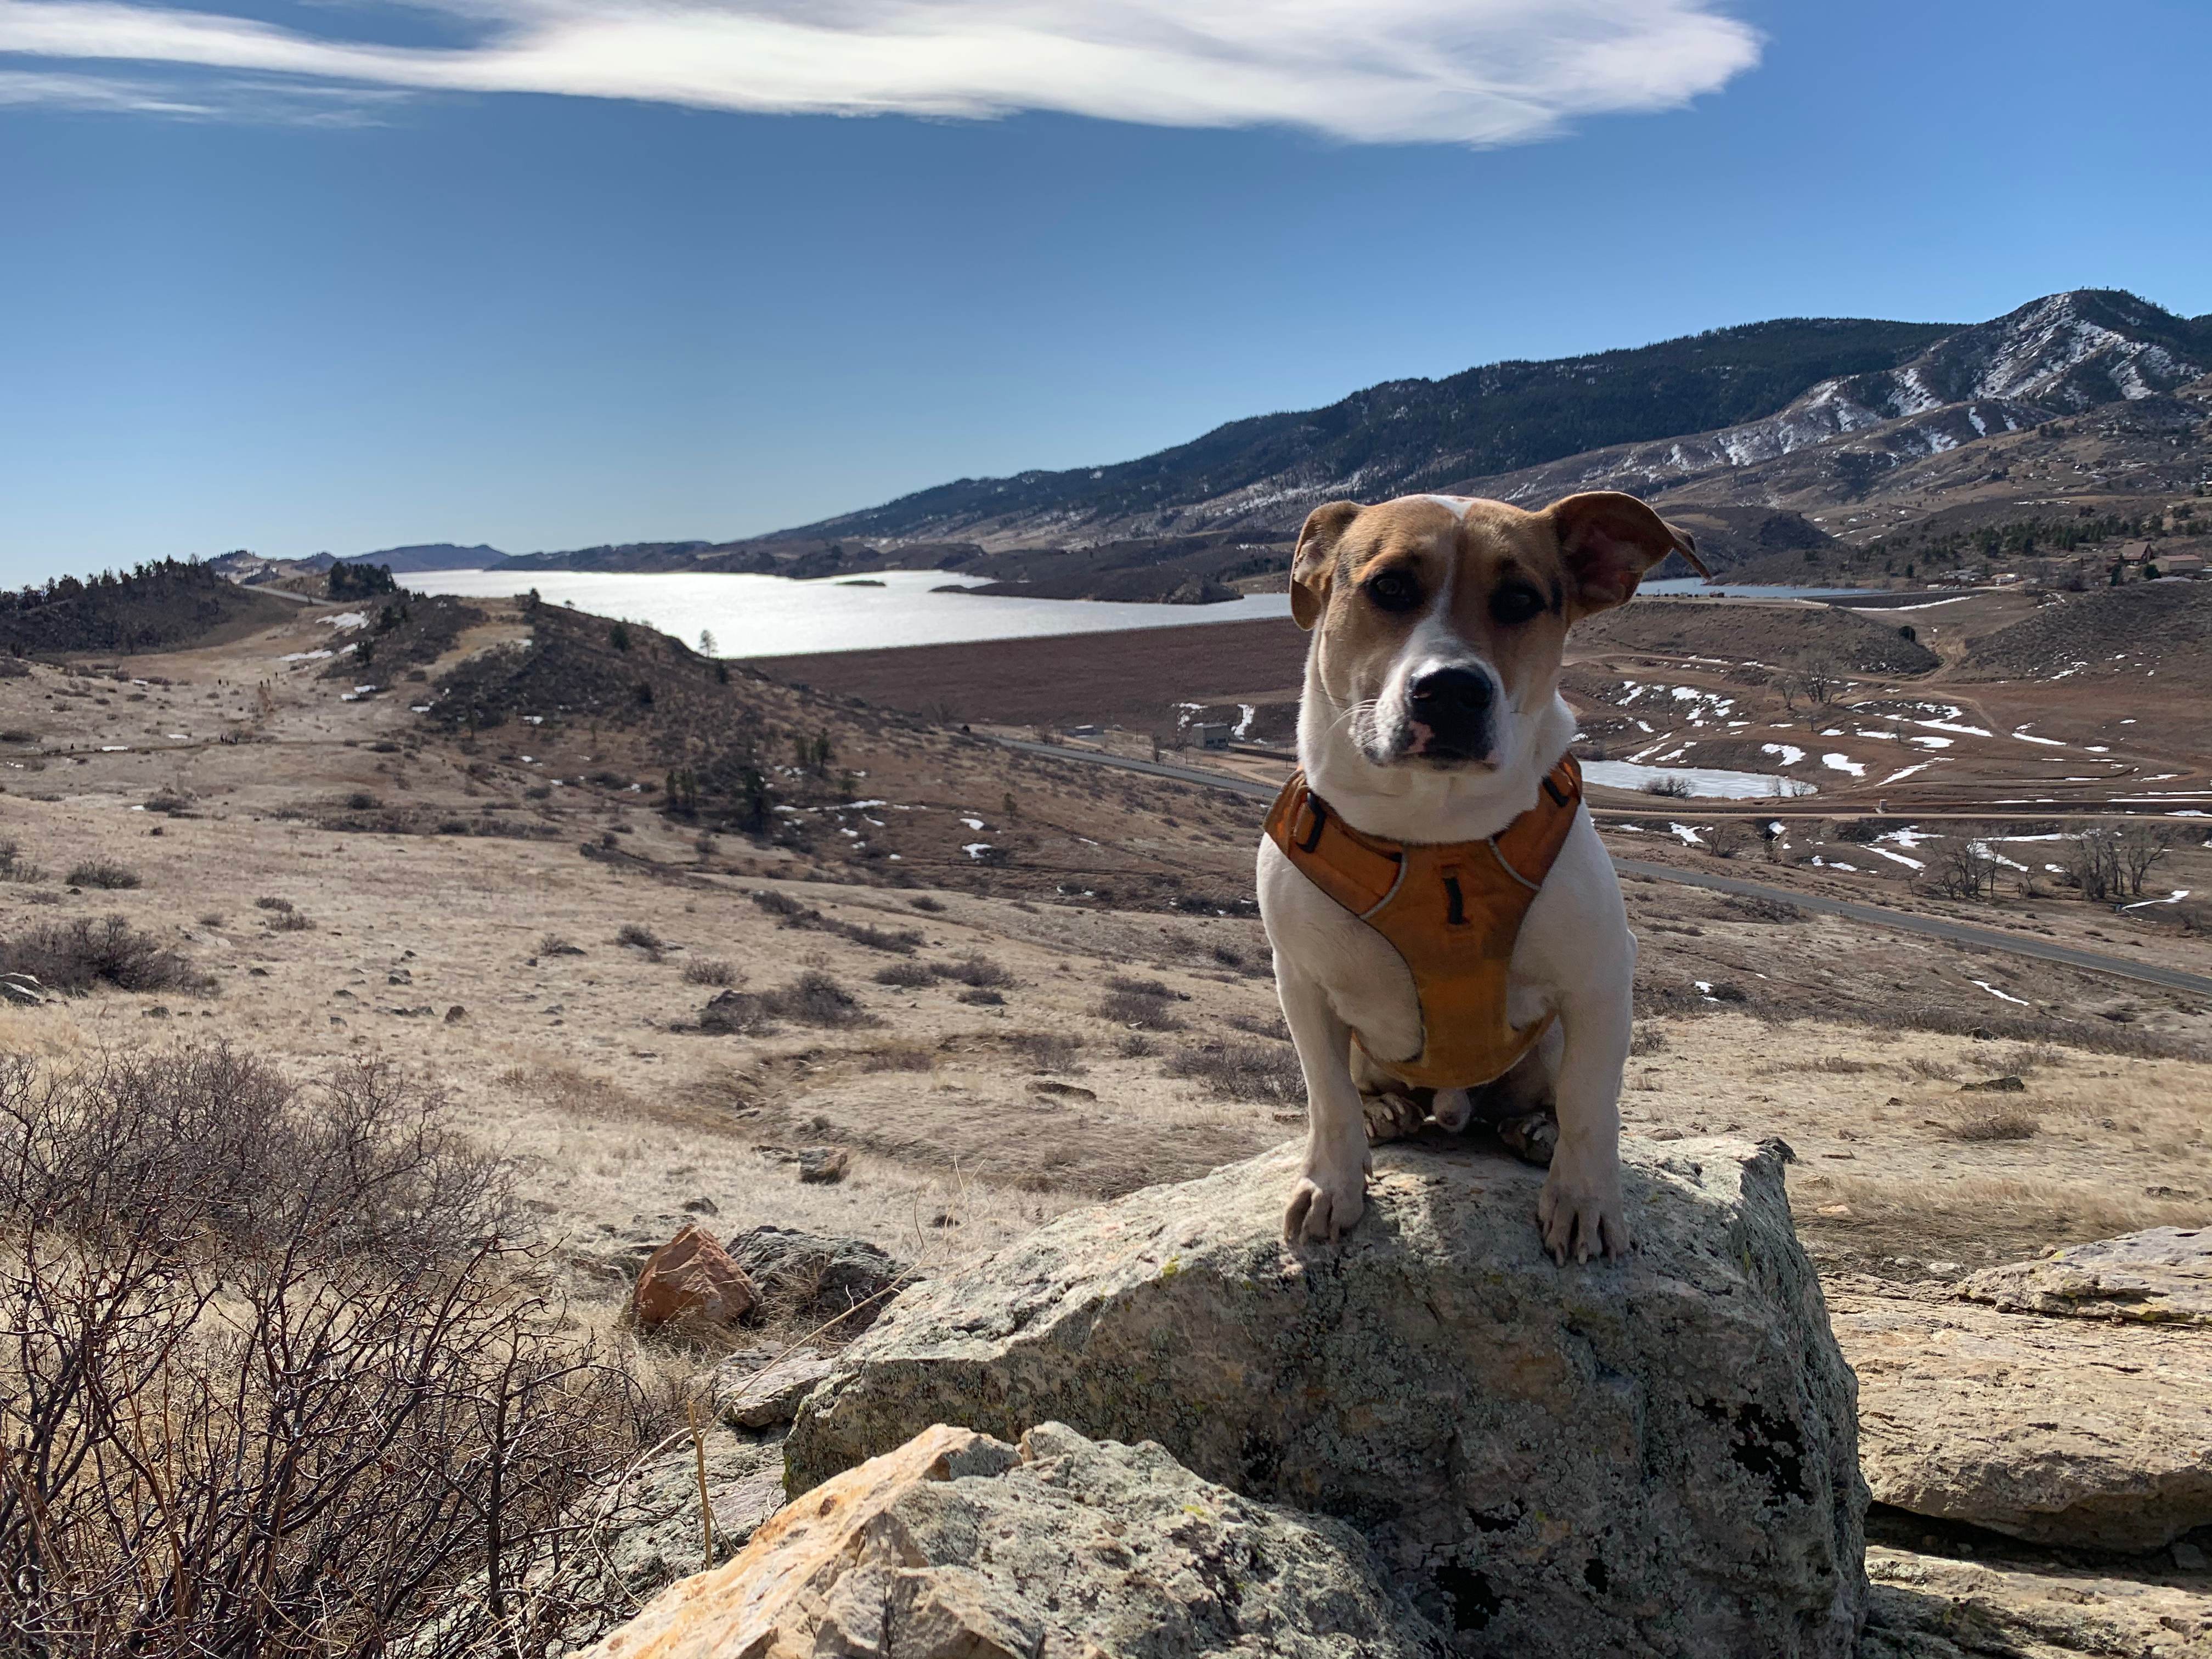 Ollie with Horsetooth in background